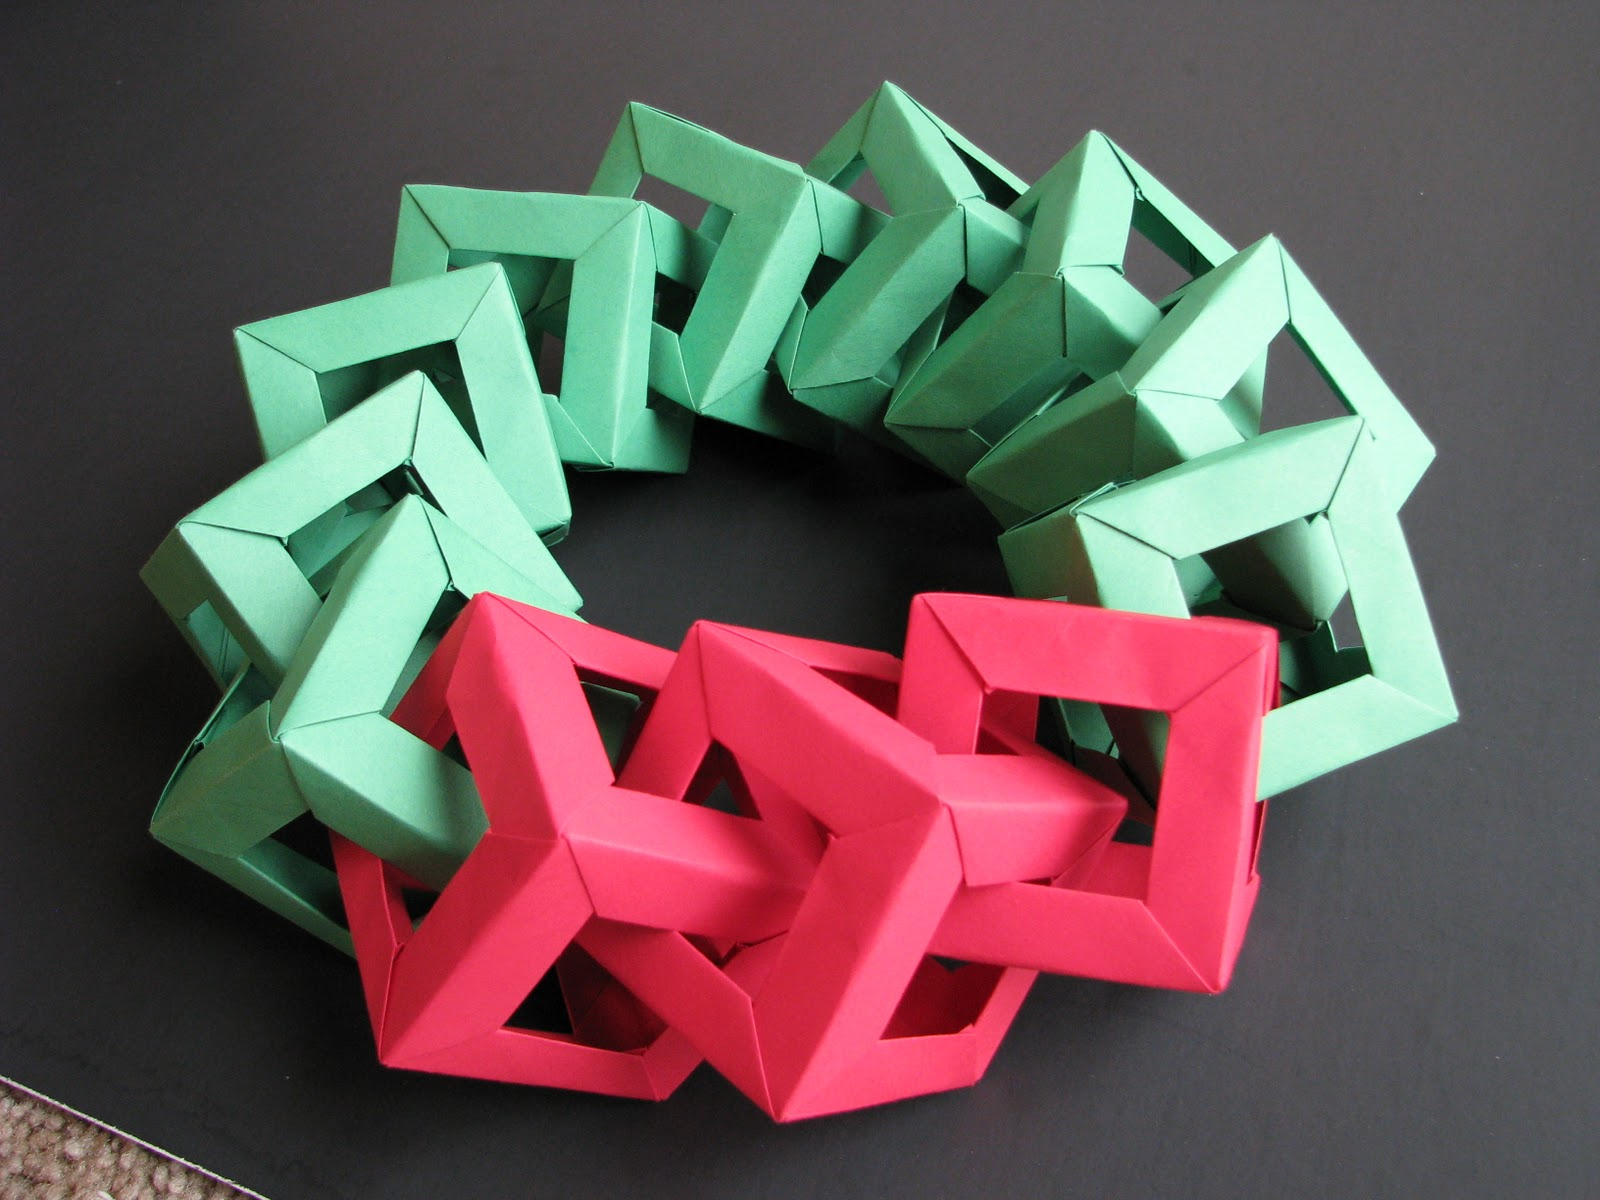 Easy Origami Christmas Ornaments Instructions Lets Make Origami Origami Christmas Decorations Origami Wreath